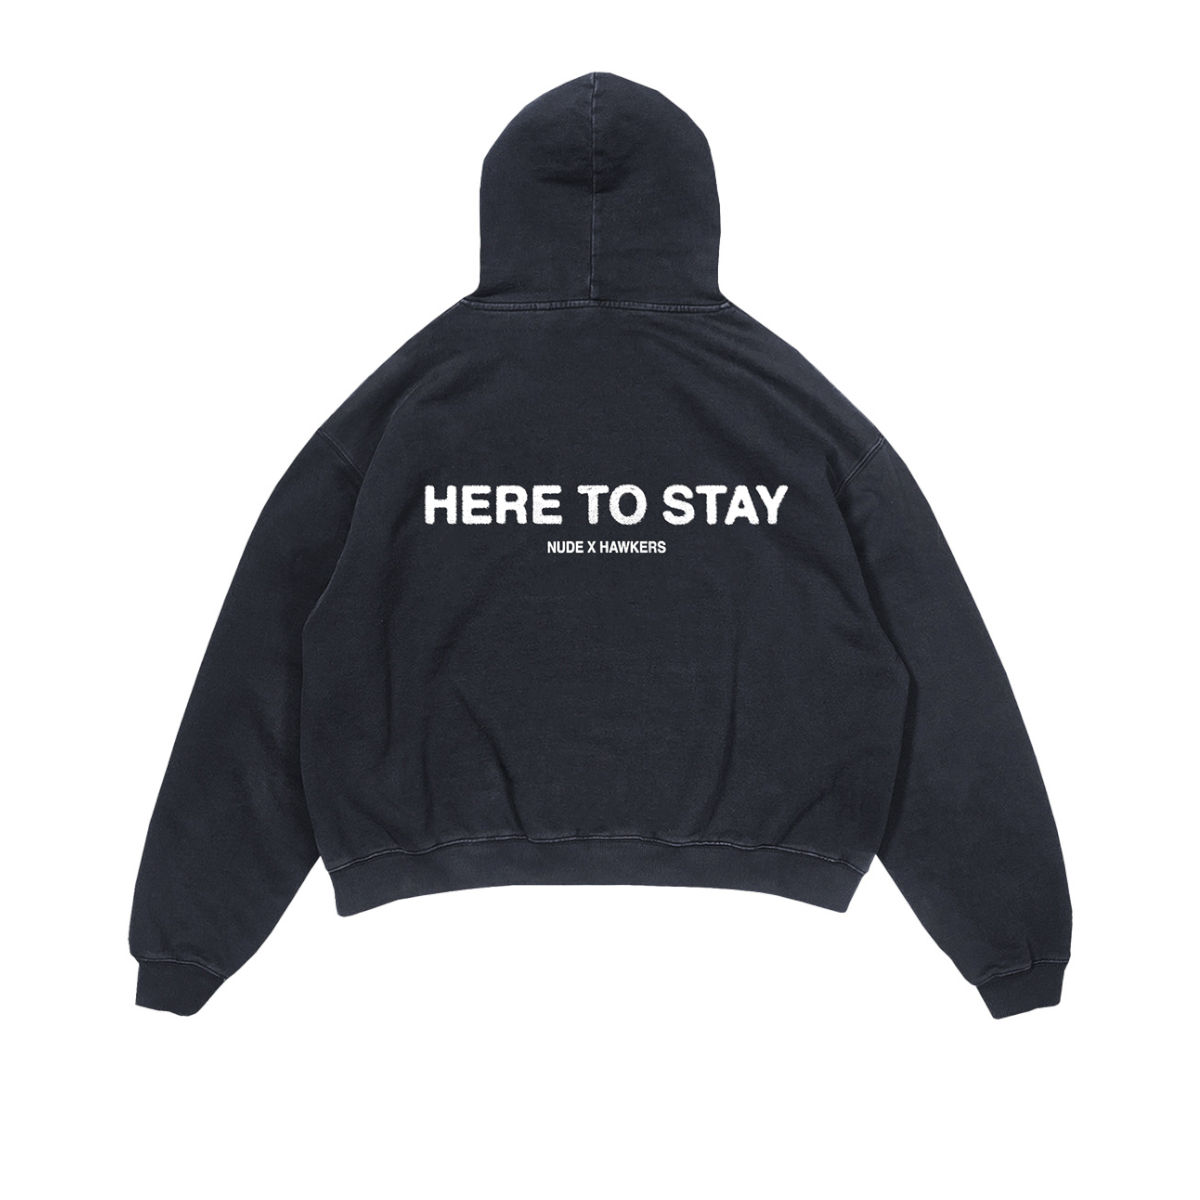 Hawkers X Nude - Here To Stay Hood (xl)